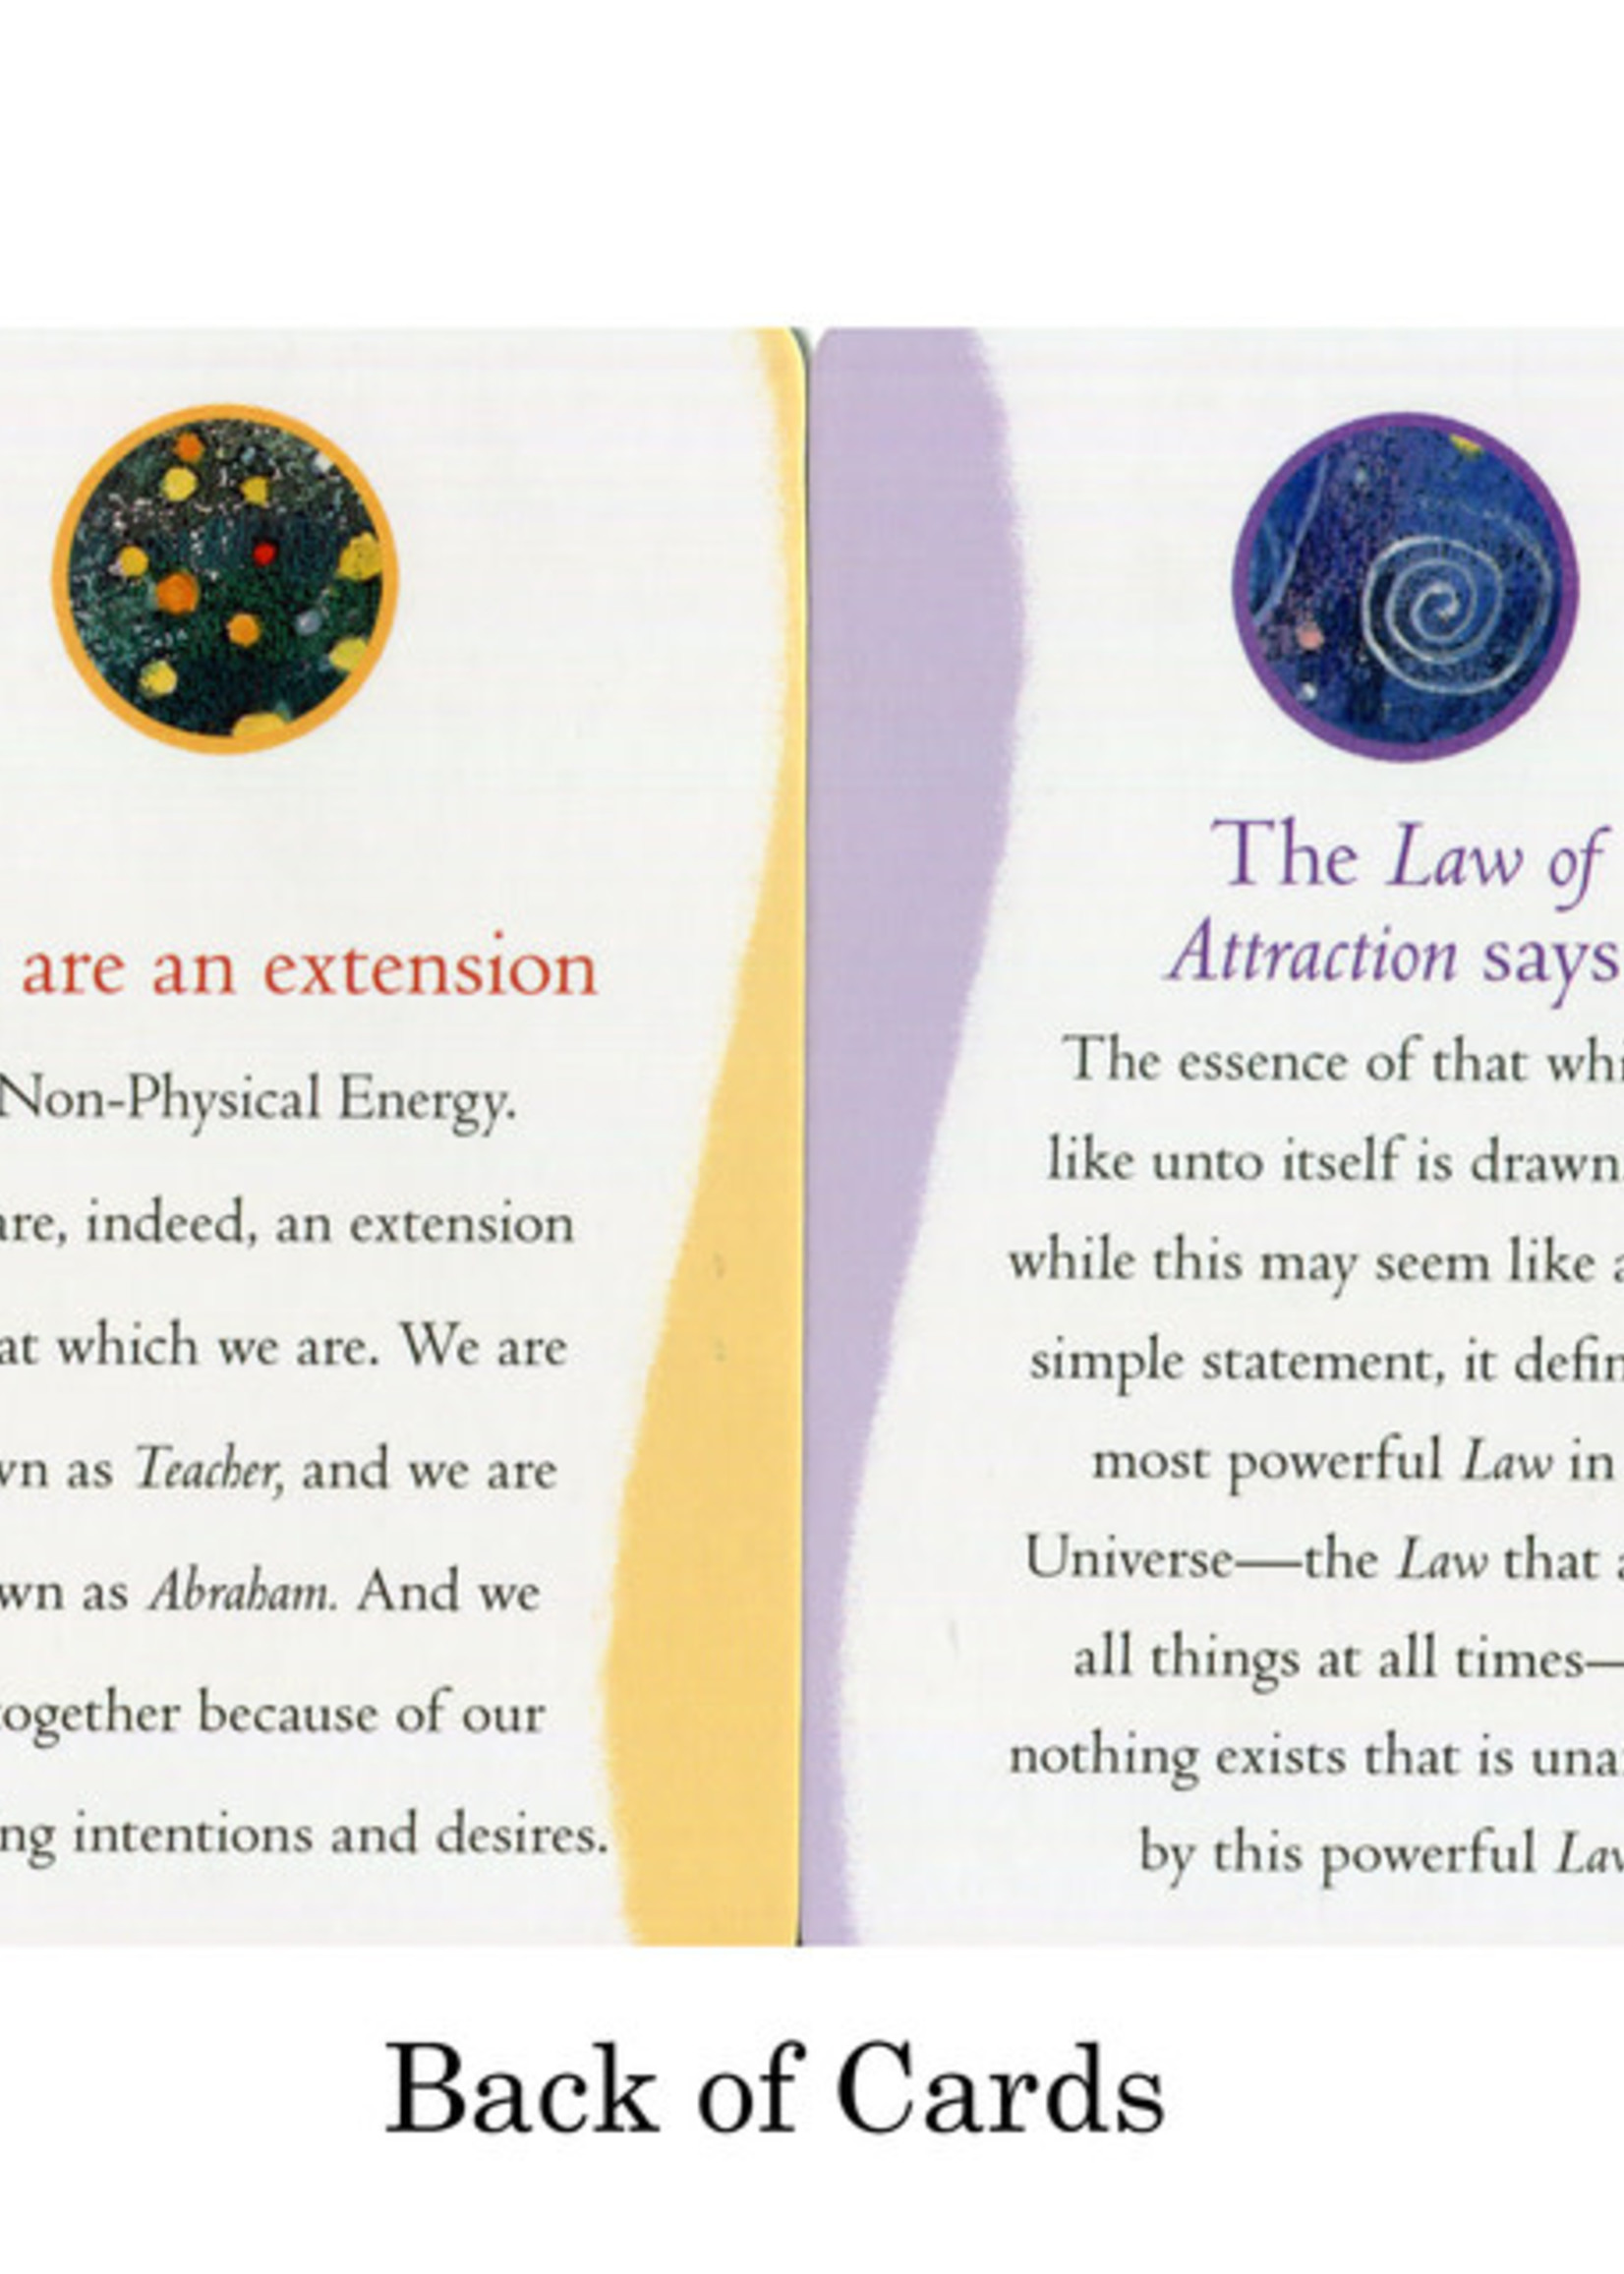 The Law of Attraction Oracle Cards